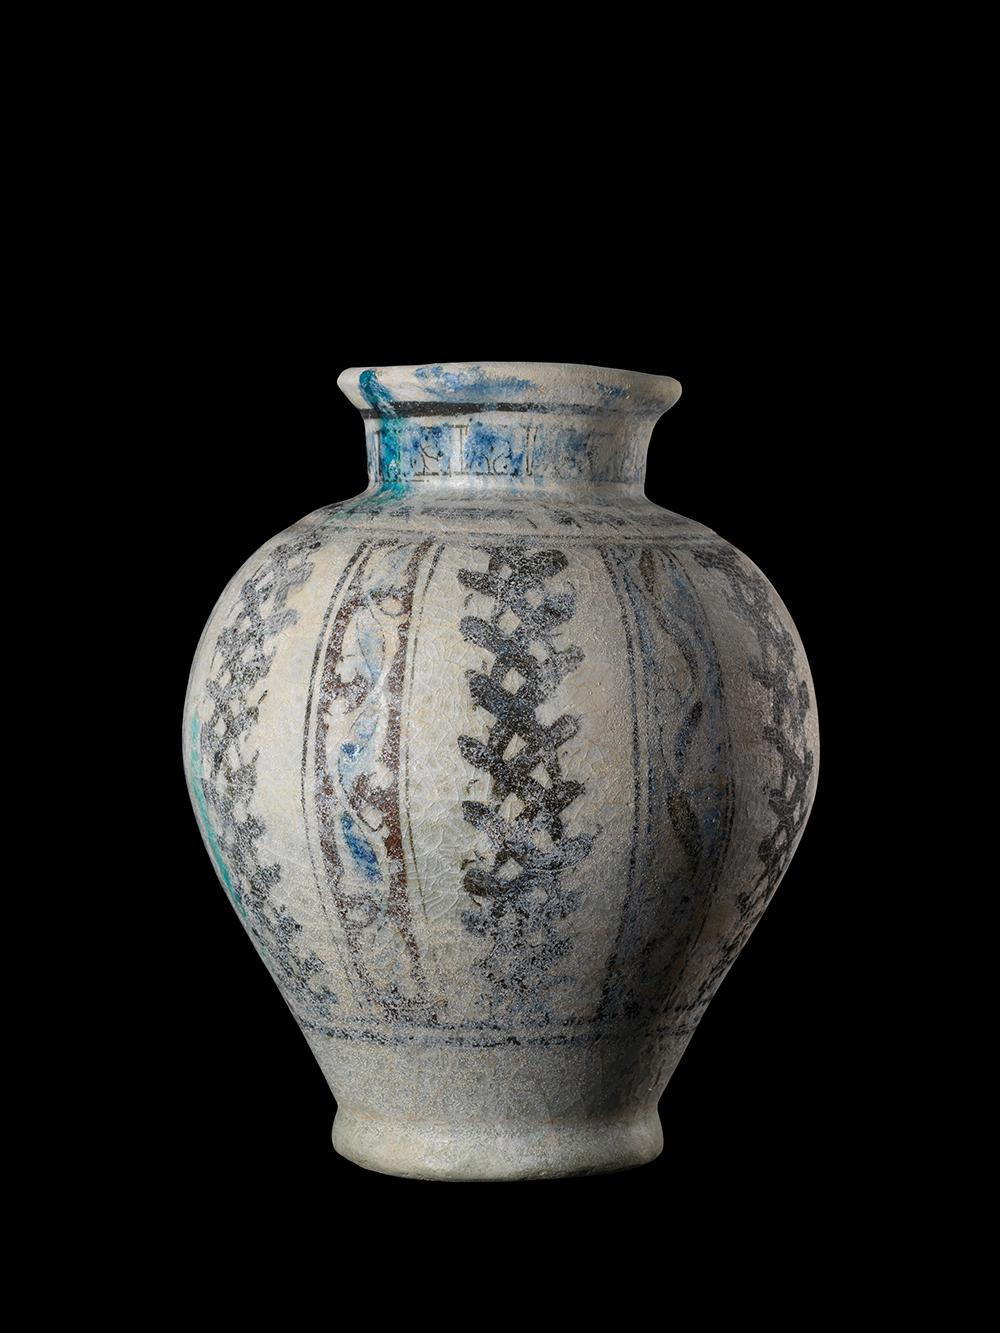 A baluster-shaped ceramic vase with siliceous paste painted in manganese and cobalt, under a transparent glaze. With hand painted blue and white decorations. Stone paste or ‘fritware’ vessels with lustre, turquoise, white and cobalt blue glazes were